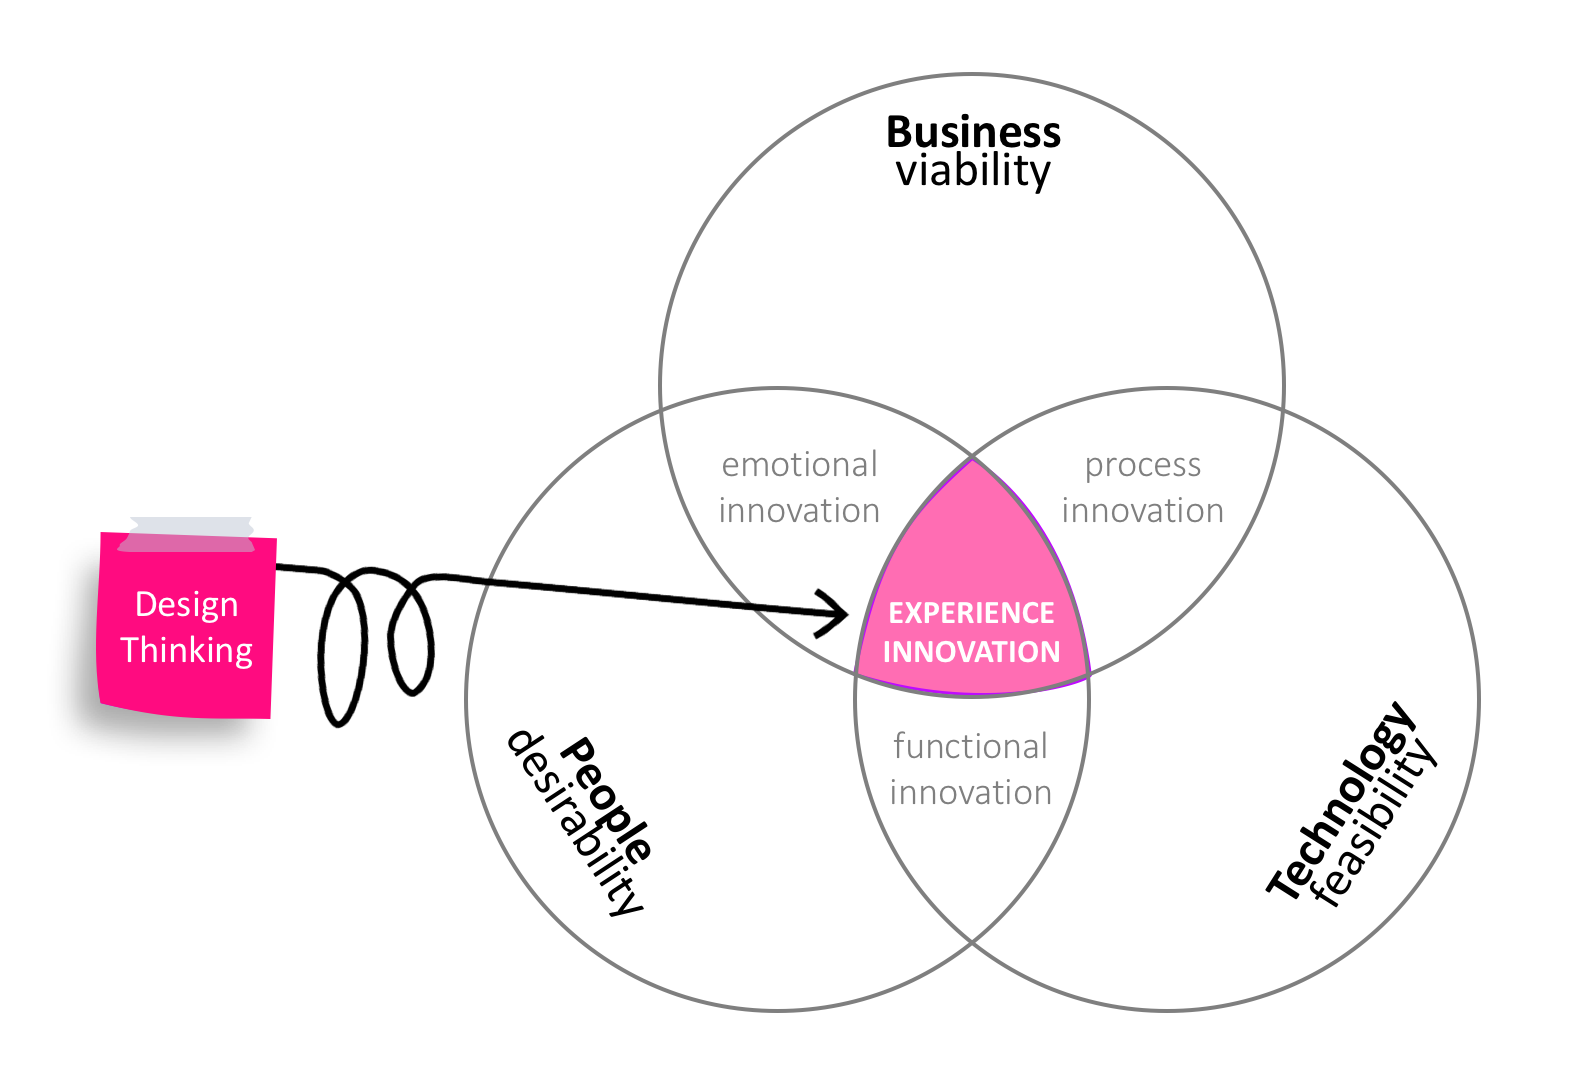 experience innovation is the end result of desirability, viability, and feasibility.